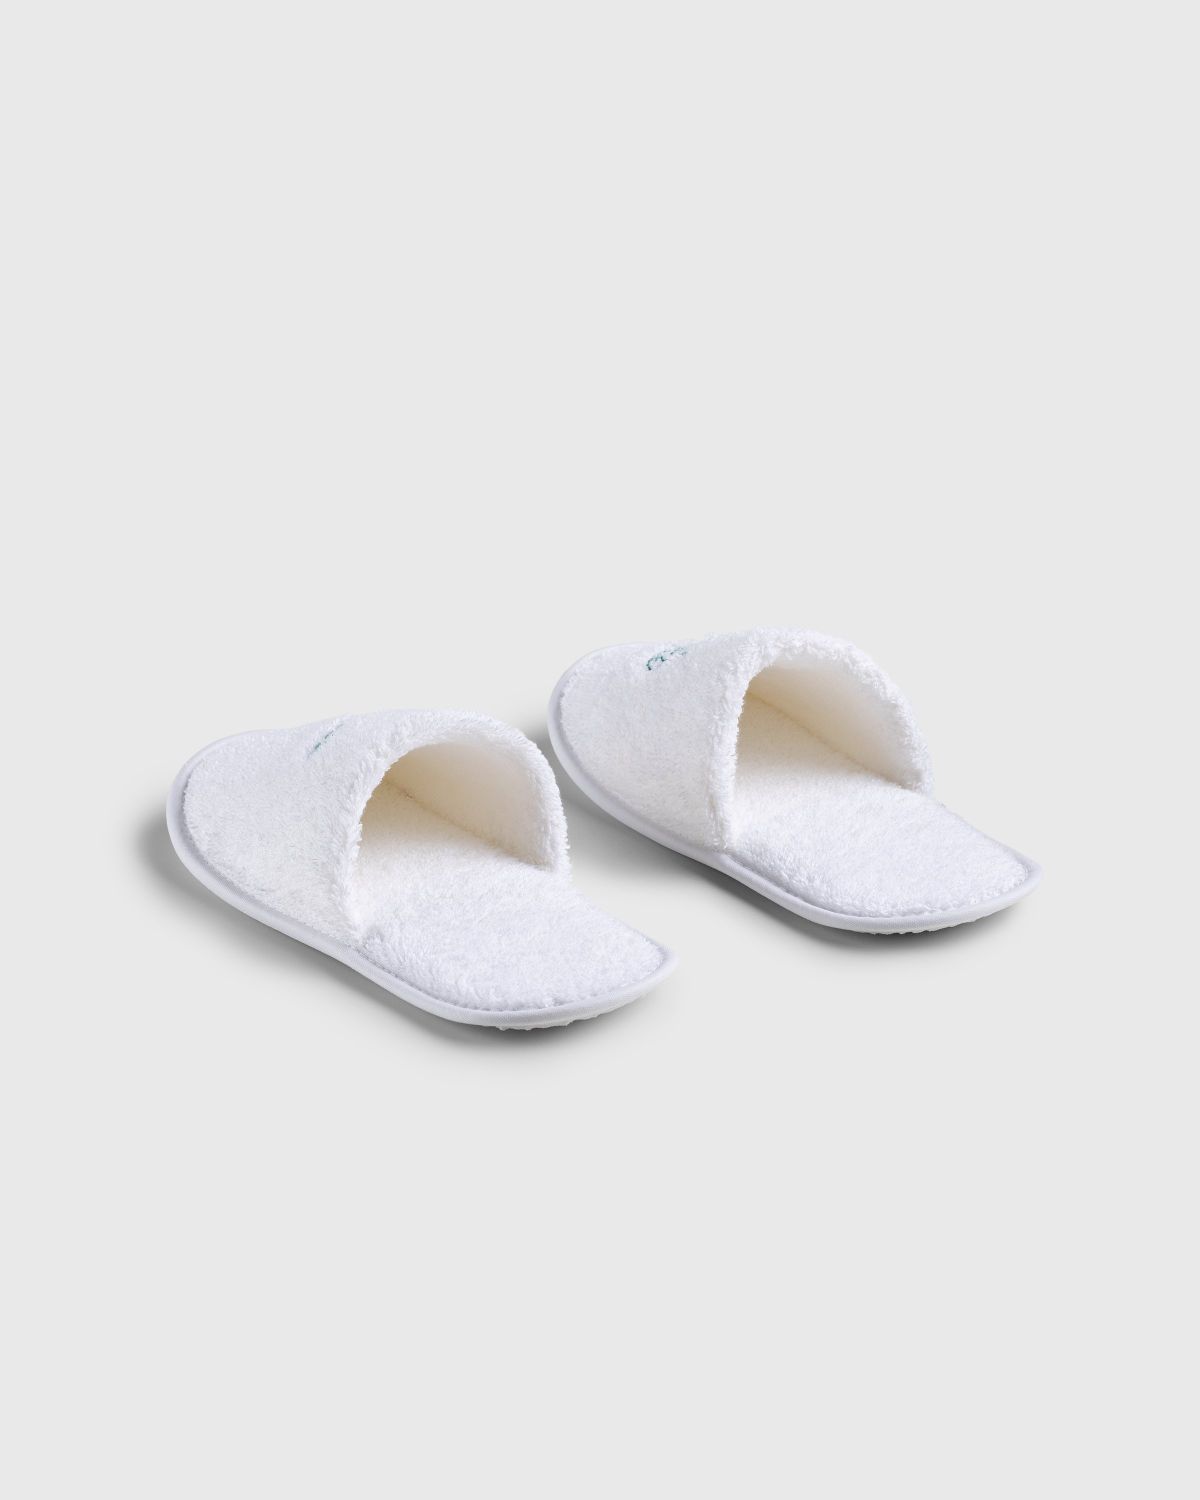 Hotel Amour x Highsnobiety – Not In Paris 4 Slippers White - Slippers - White - Image 5